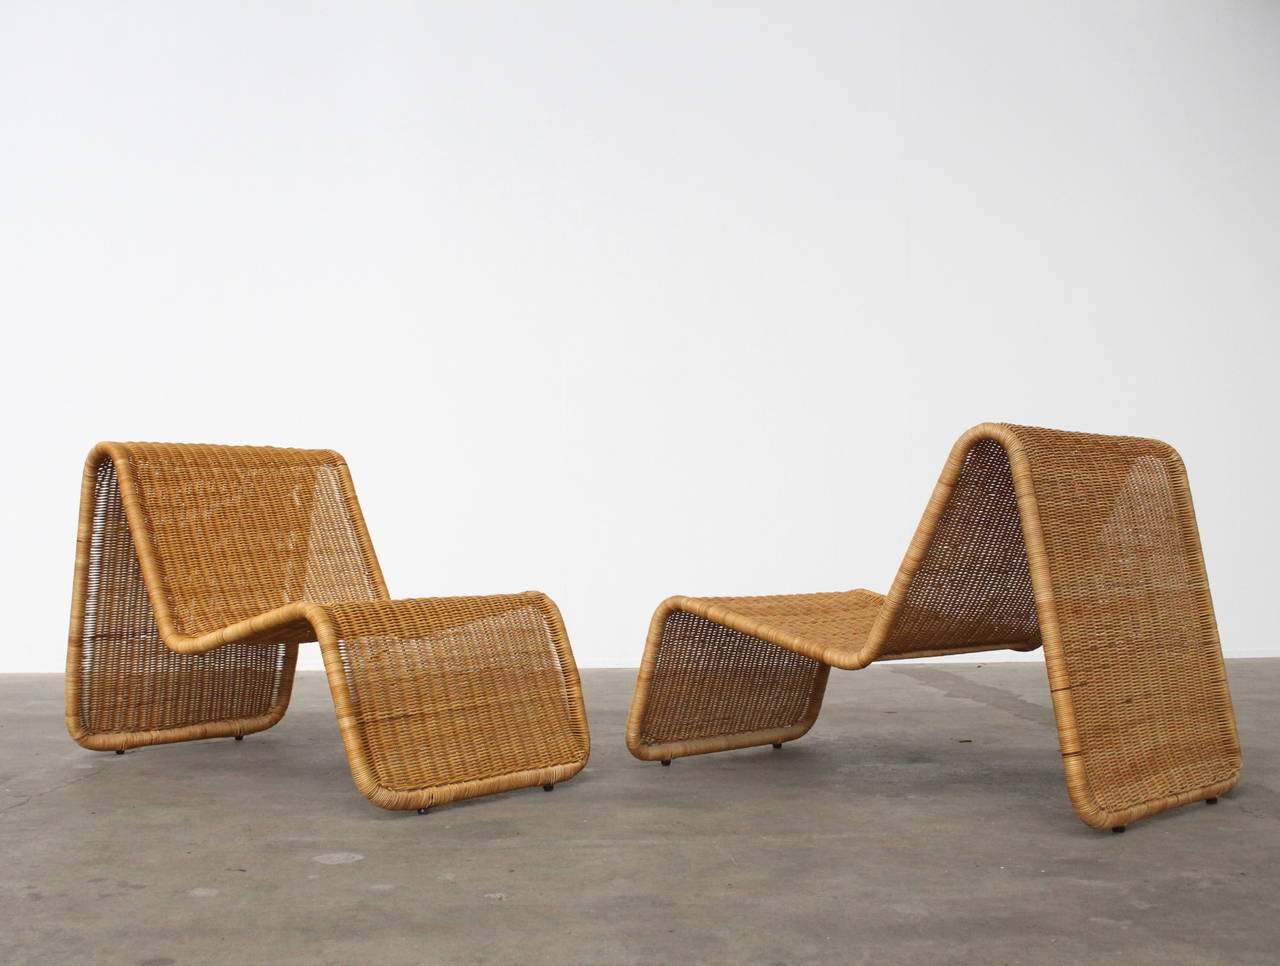 Wonderful sculptural lounge chairs designed by Tito Agnoli for Bonacina. Tubular lacquered steel frame with woven wicker. This model can be used both indoors and outdoors. Before shipping the chairs will have a professional anti-weather treatment